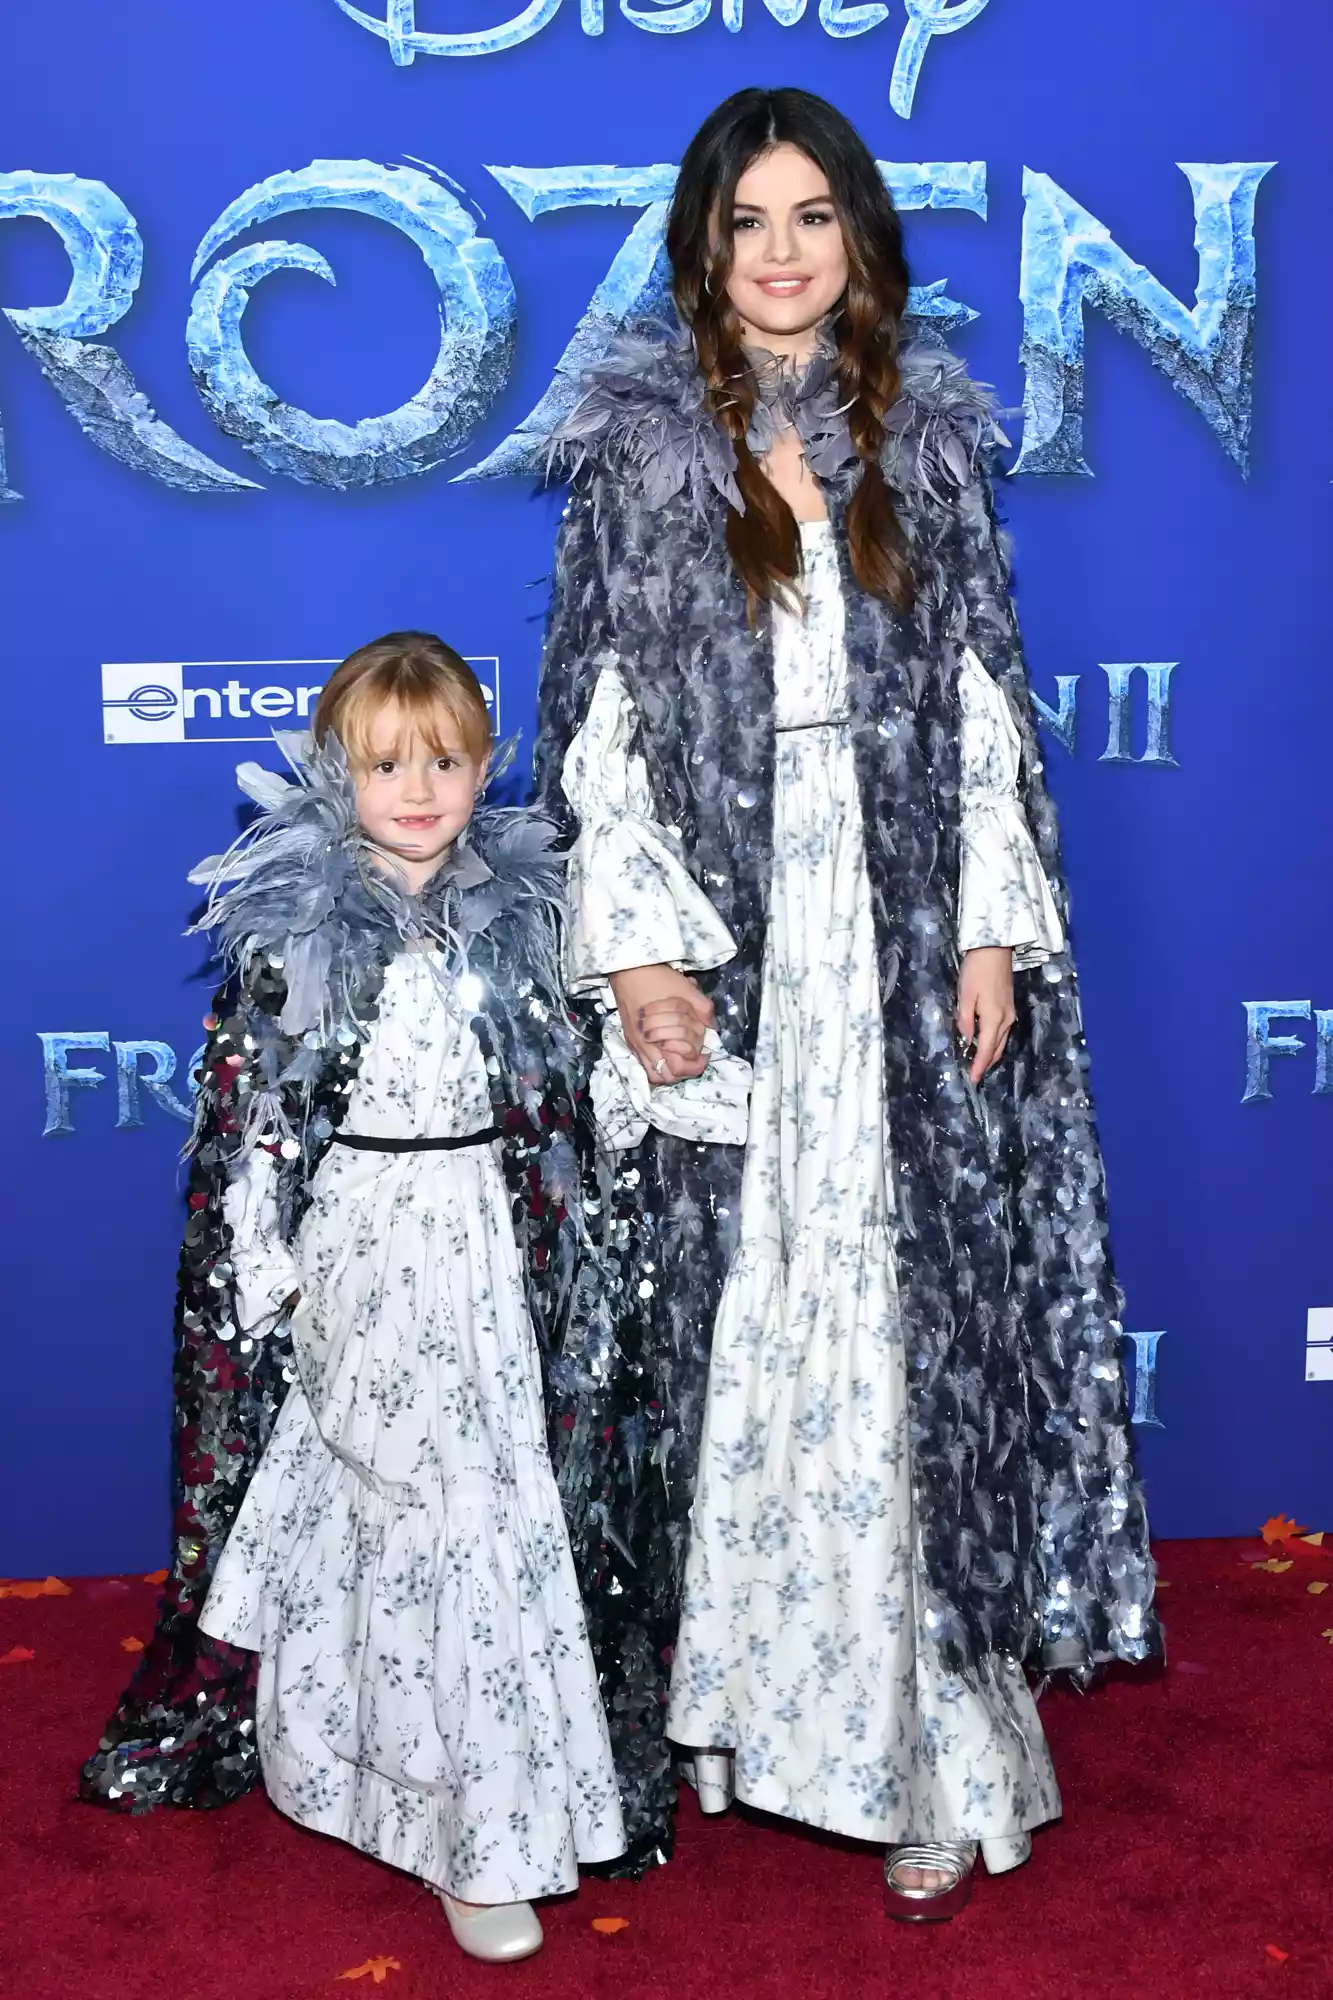 Gracie Teefey and Selena Gomez attend the premiere of Disney's "Frozen 2"